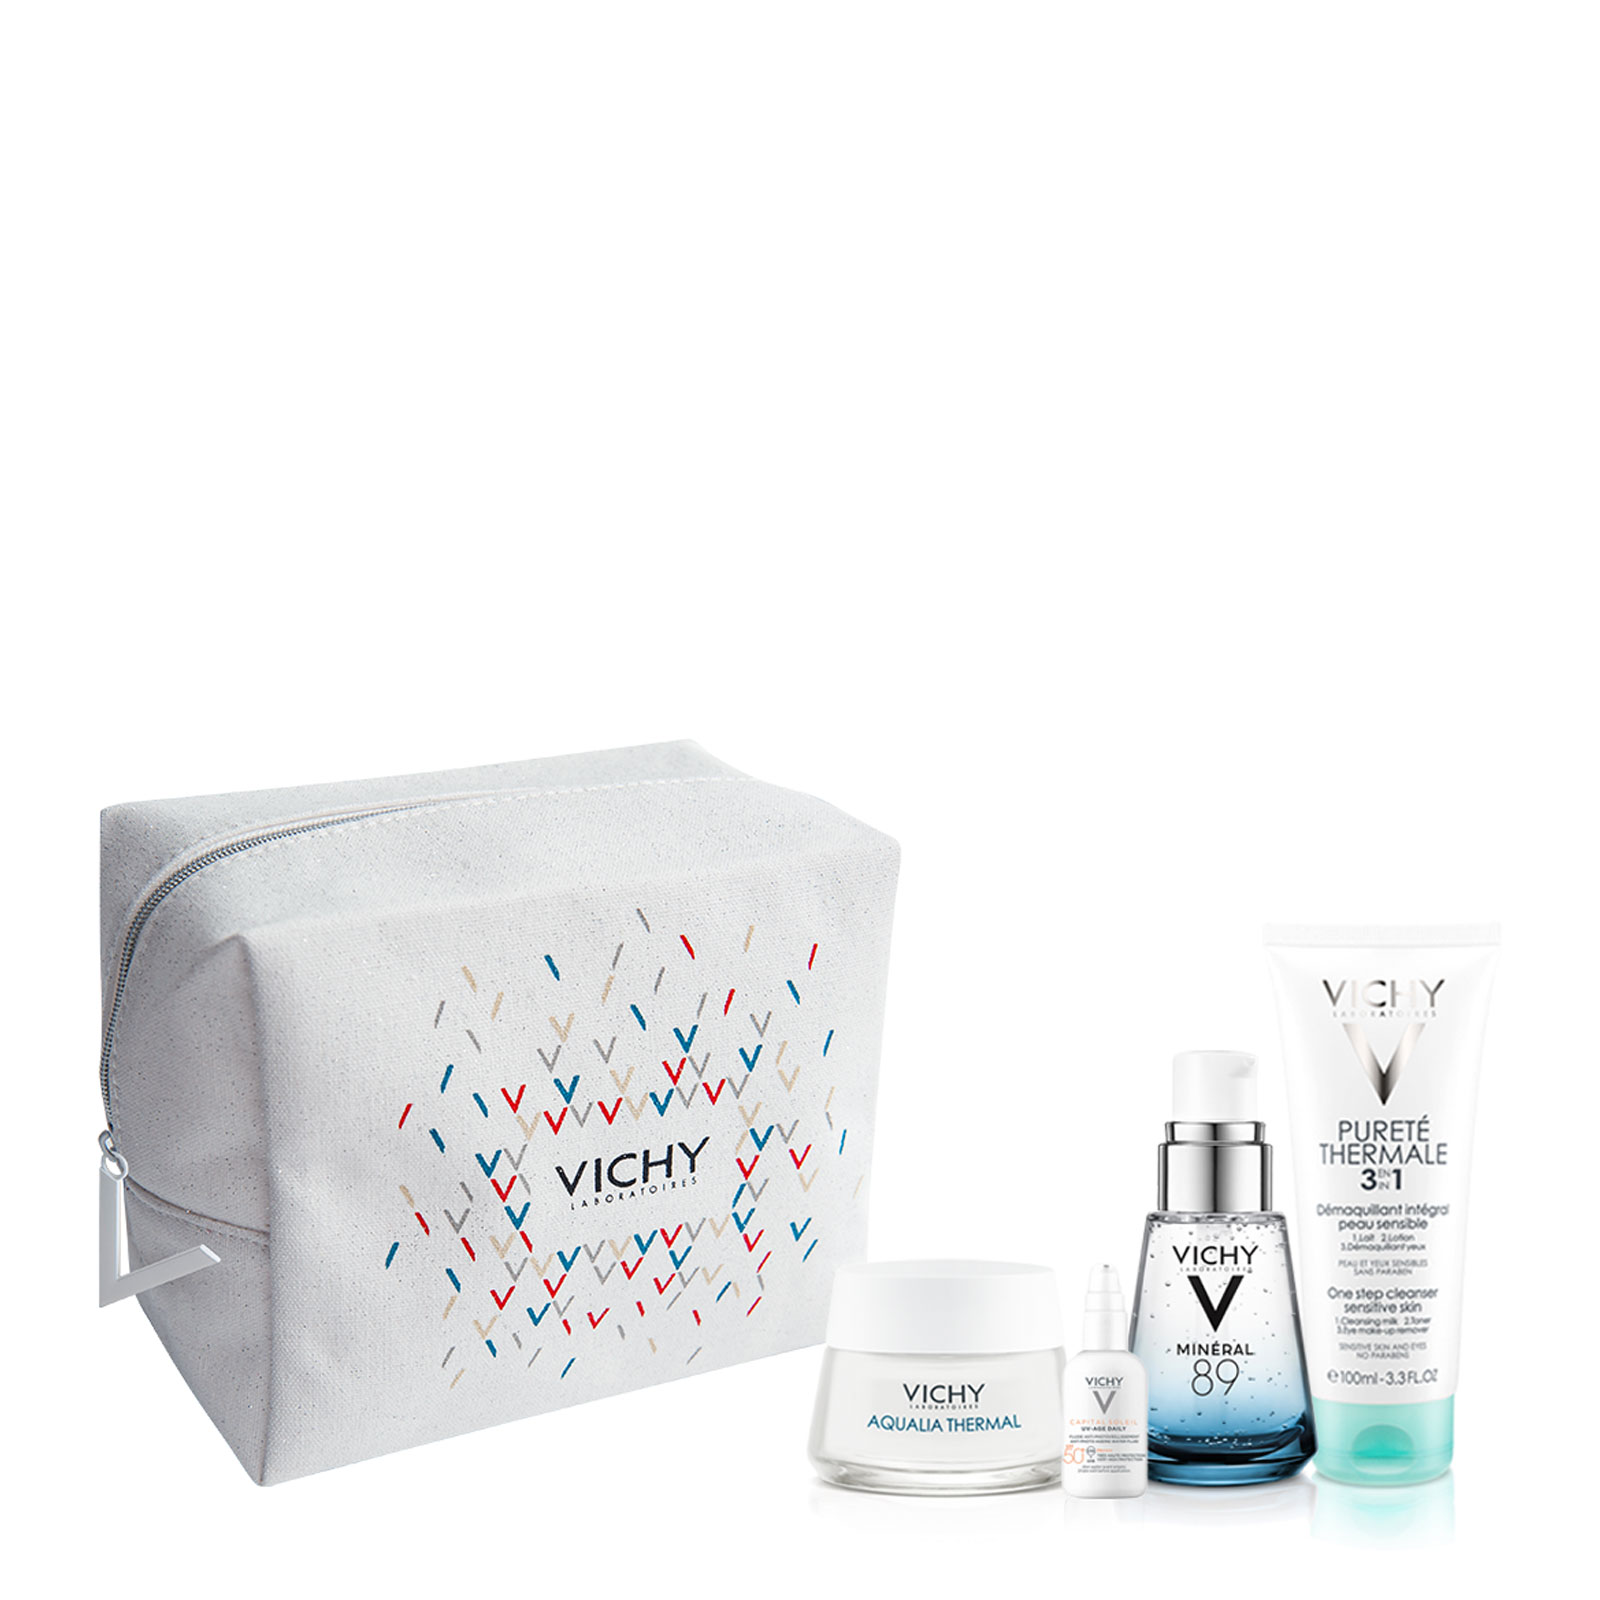 Vichy Min�ral 89 Daily Hydrate & Protect Routine Set